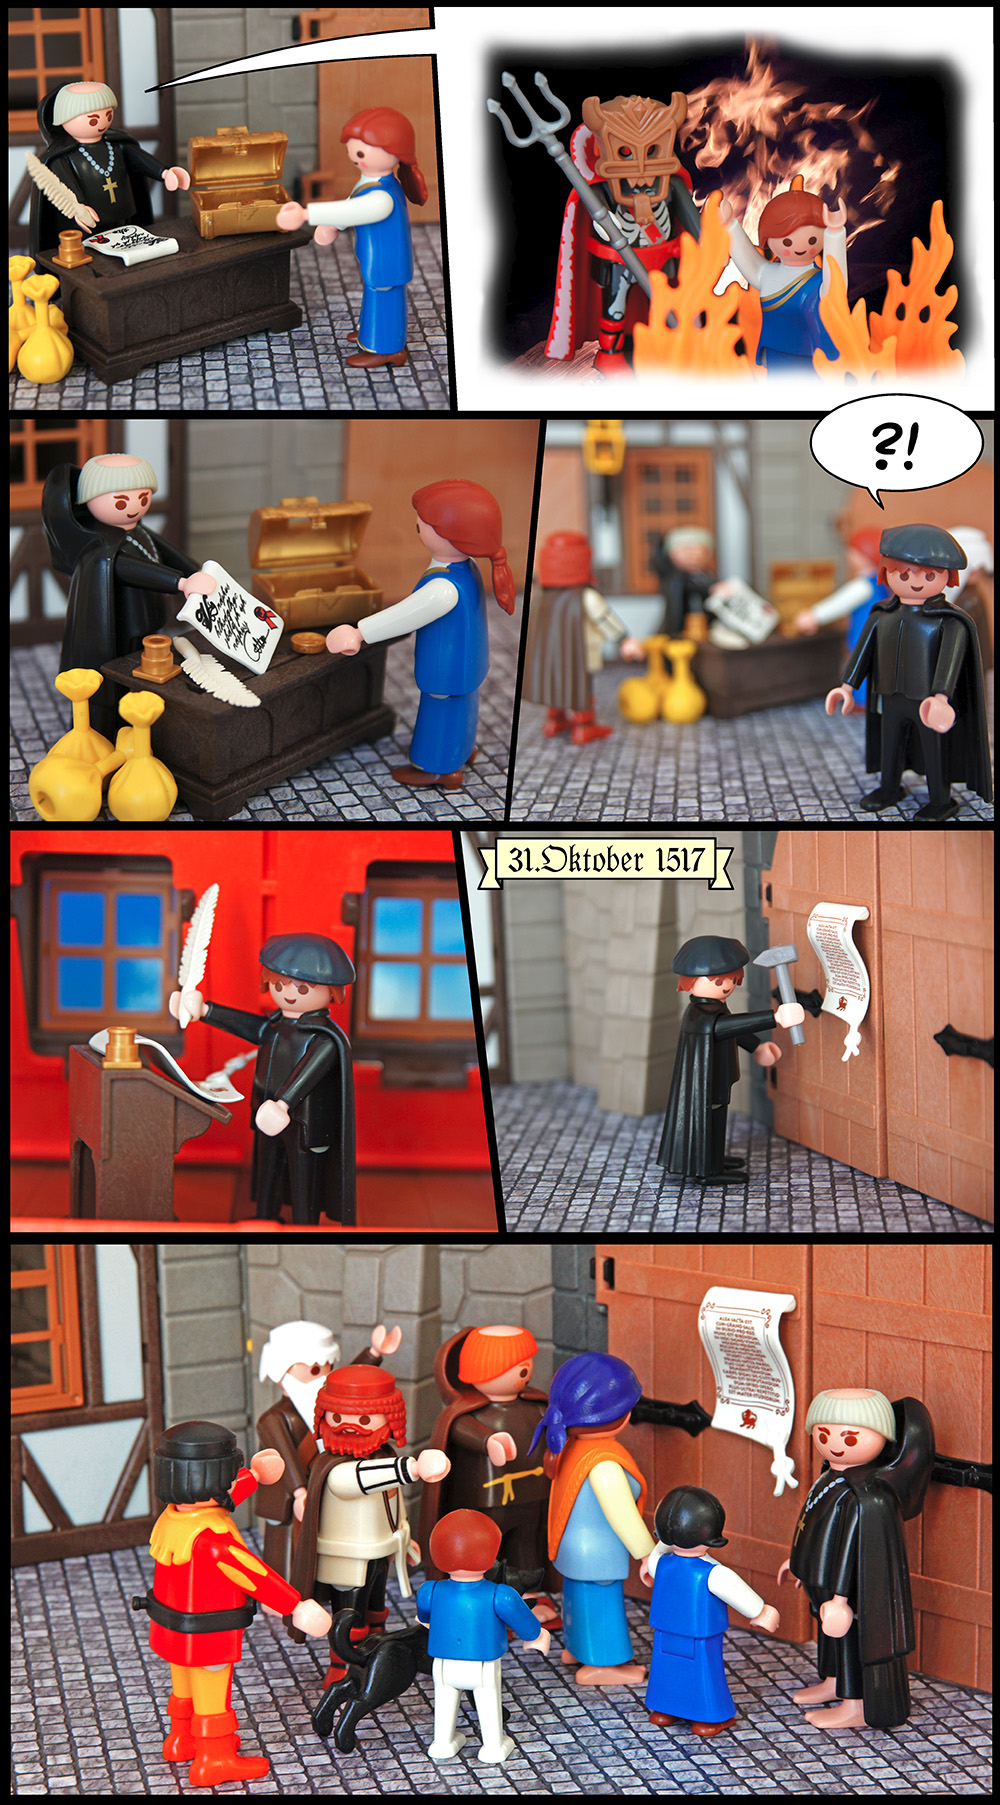 Reformation in Playmobil